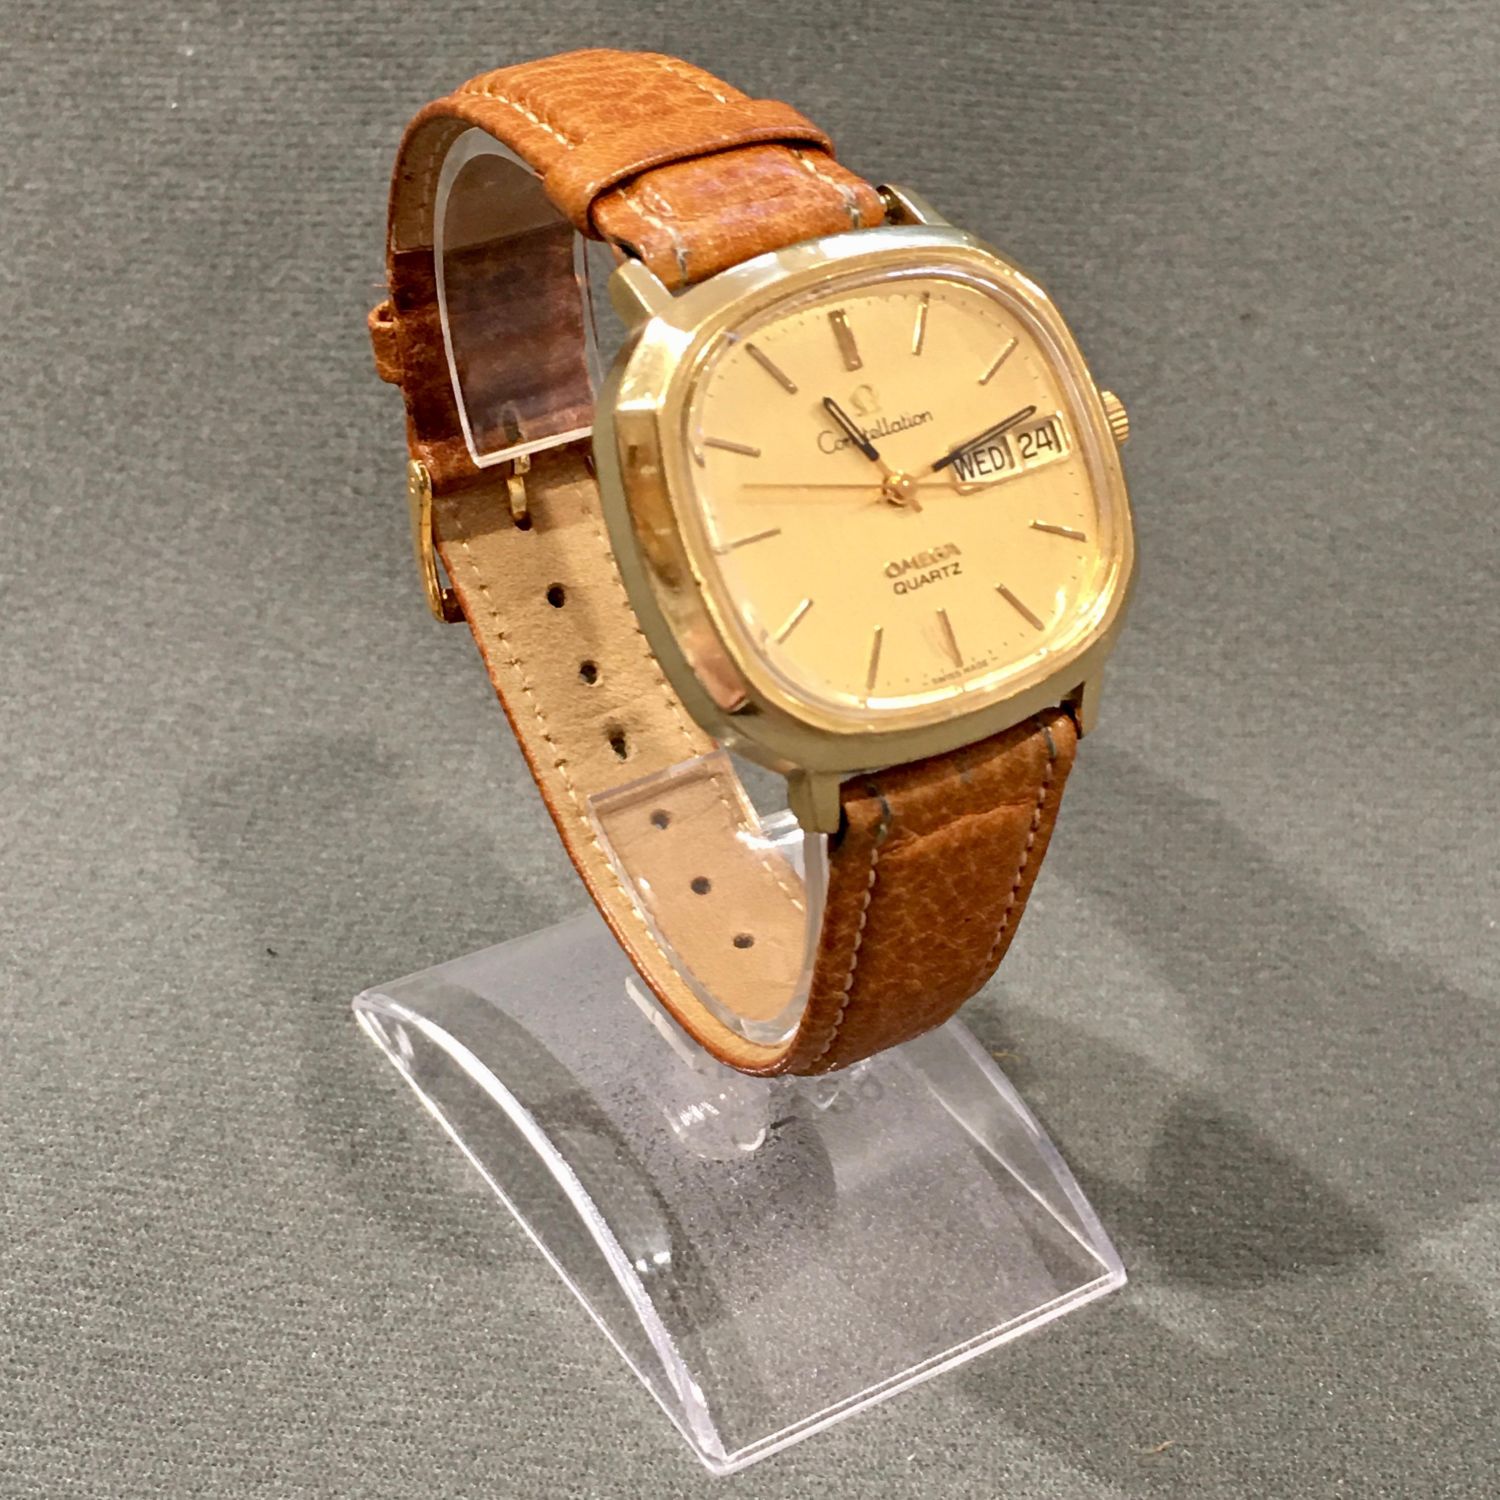 antique gold omega mens watch